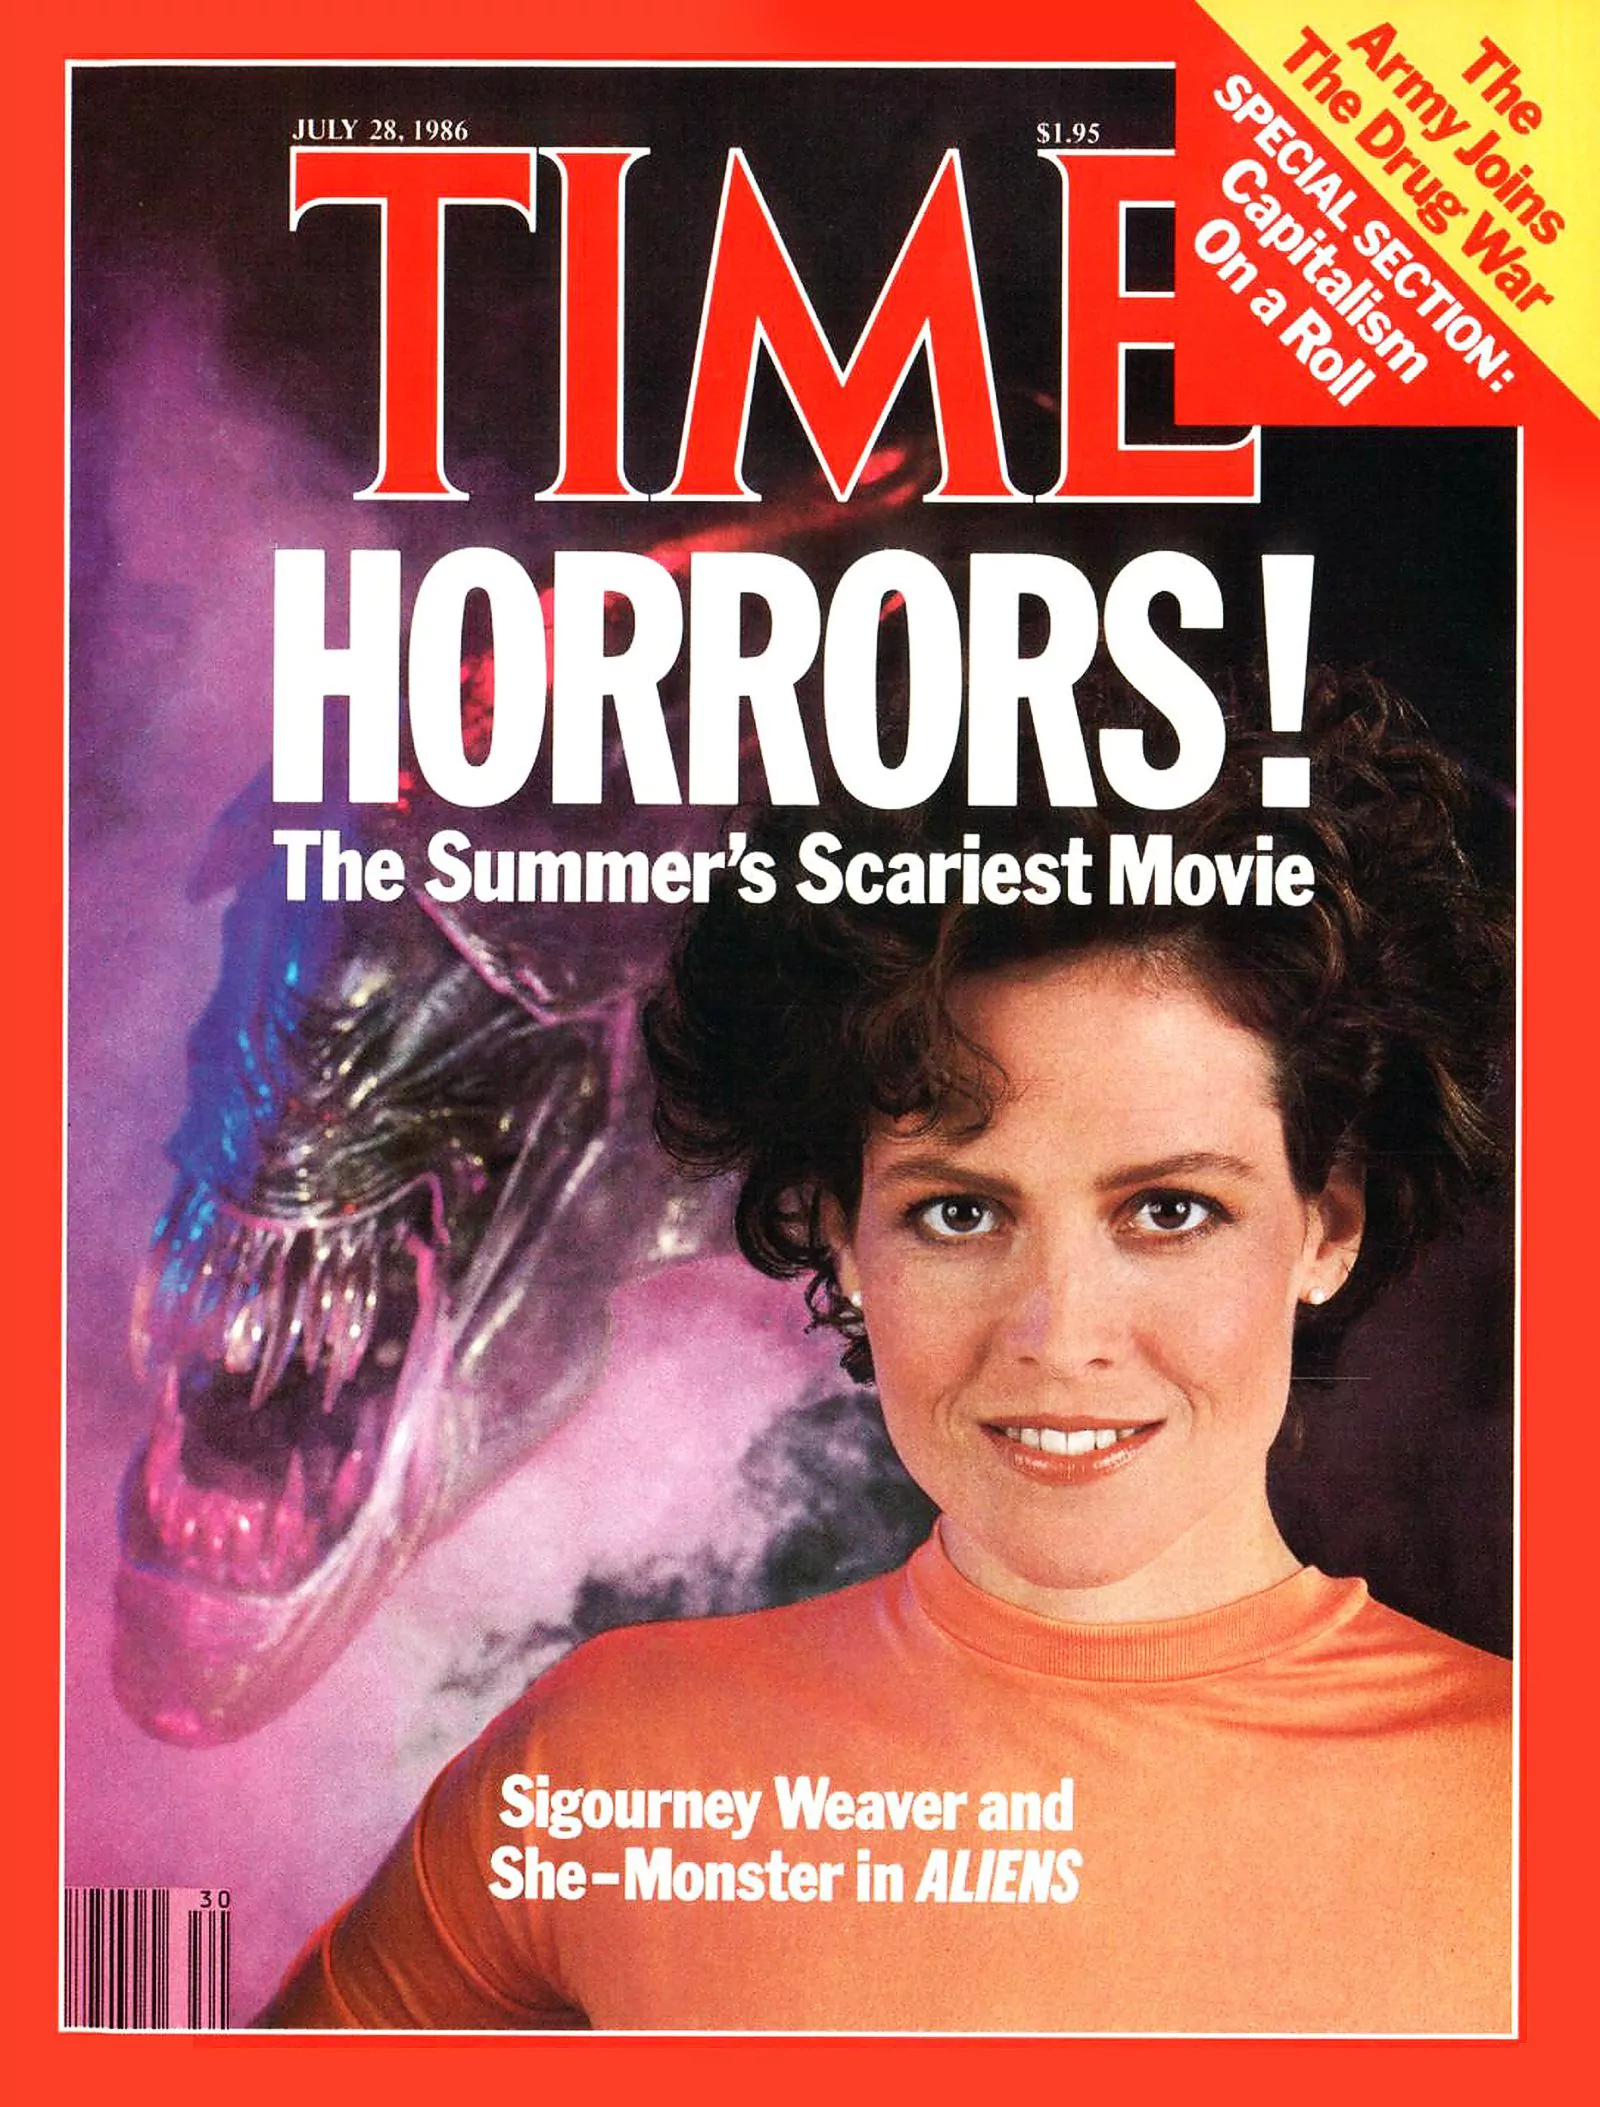 Sigourney Weaver on the cover of Time Magazine, July 28, 1986